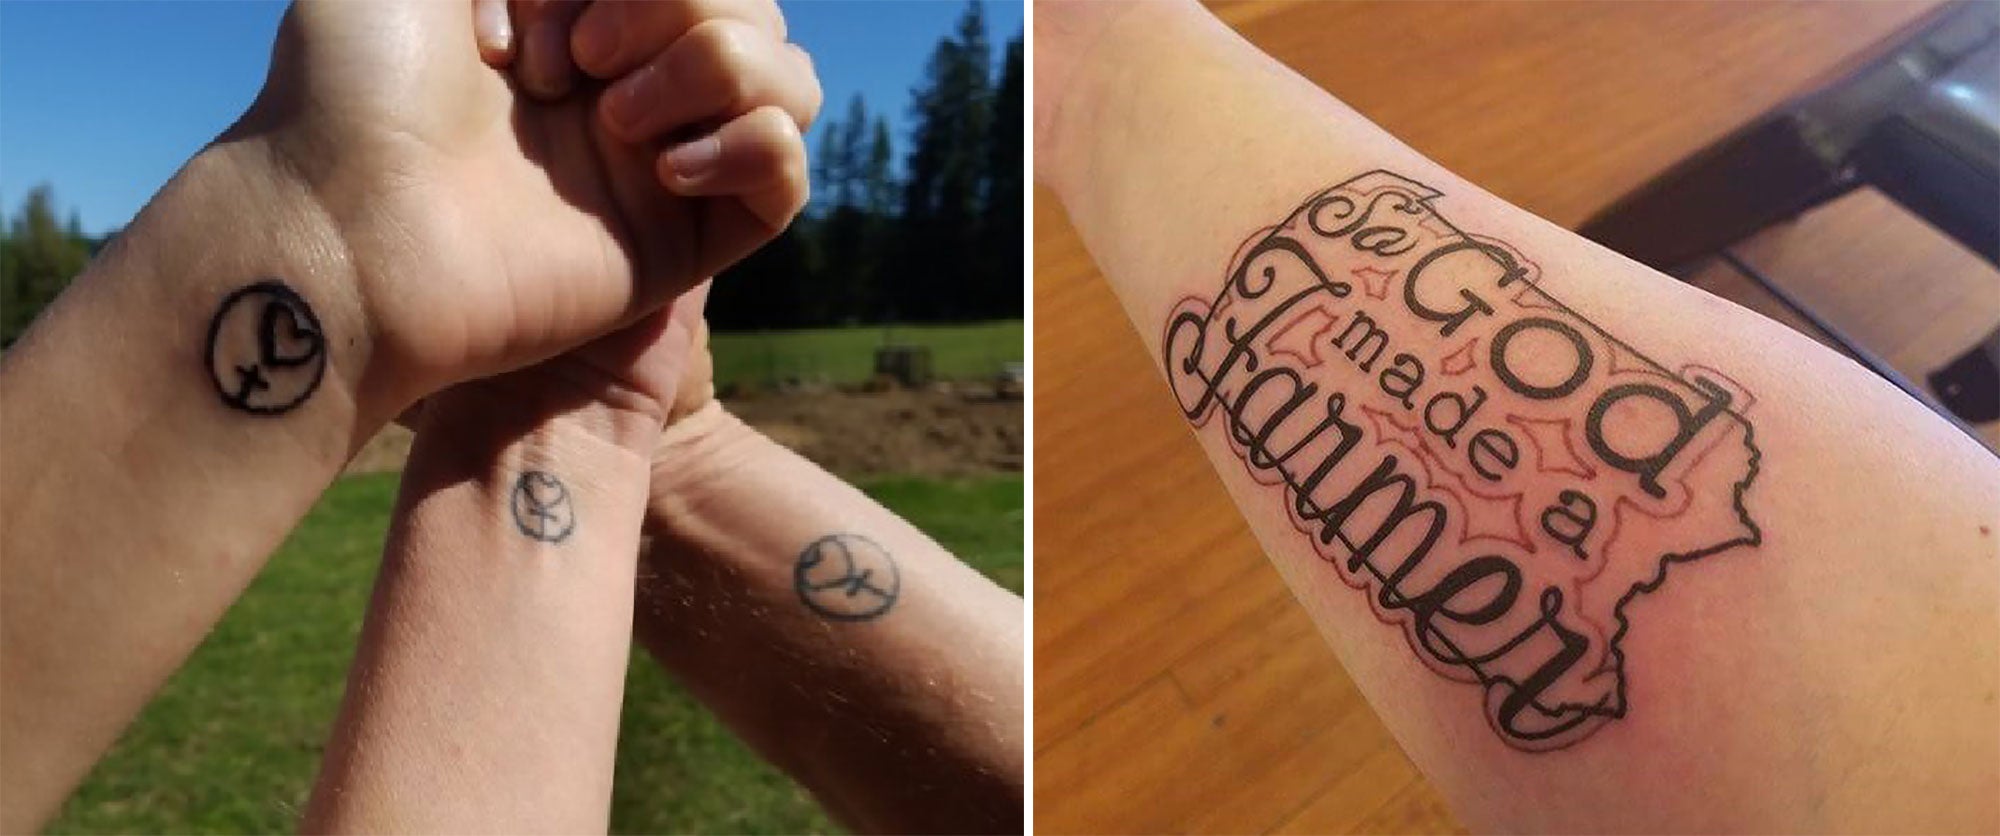 These farmers' tattoos tell powerful stories | AGDAILY